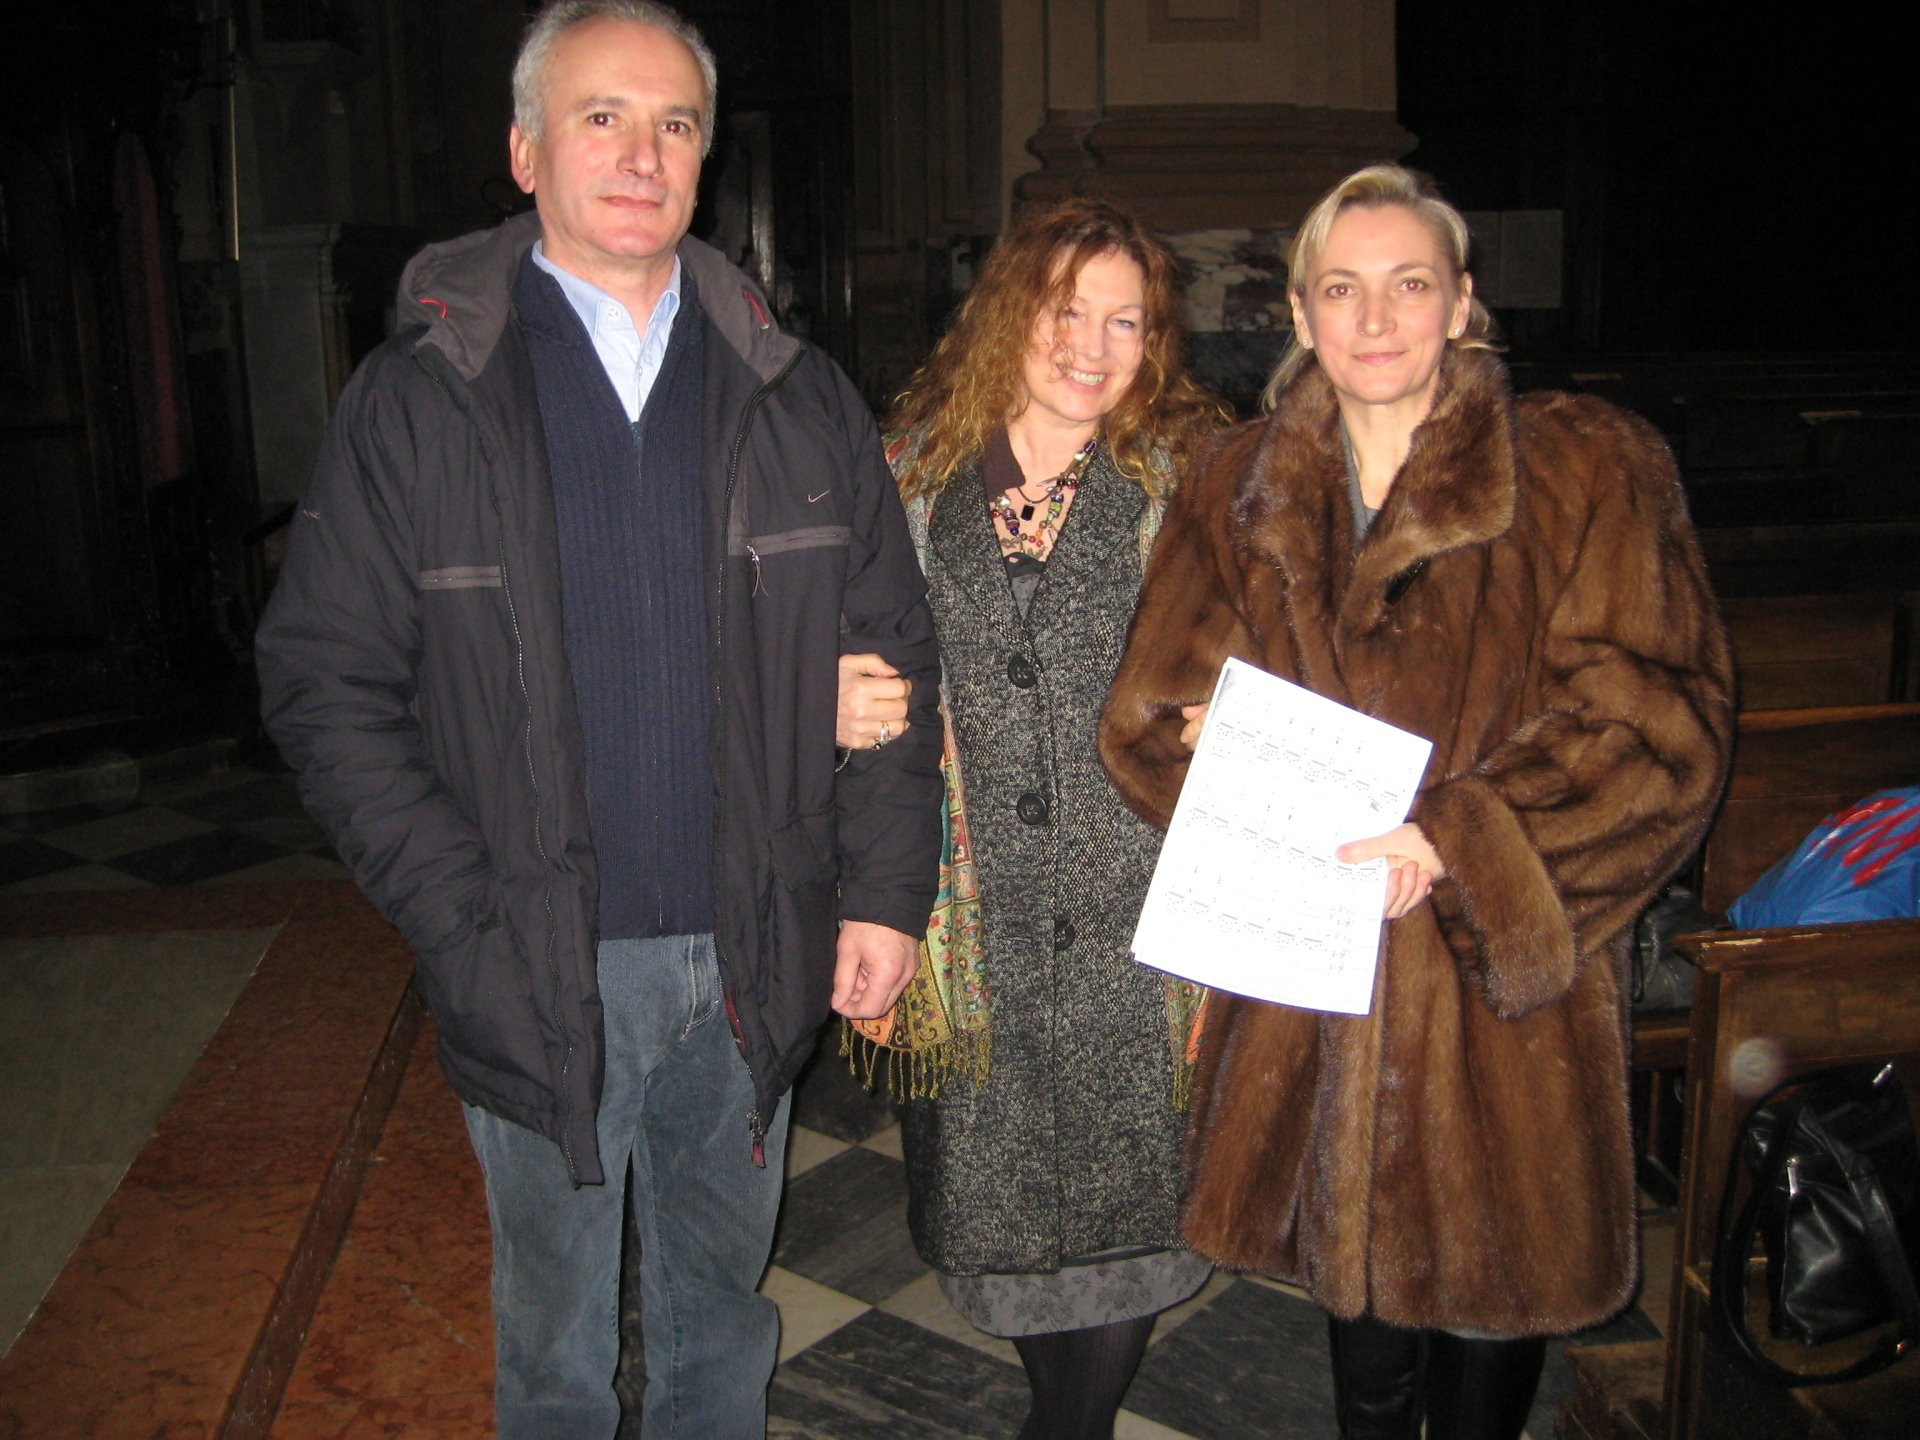 Dan Billany. Jodi Weston Brake ,BBC visit to Soragna. Pictures of meeting in Town Hall with the Meletti Family.